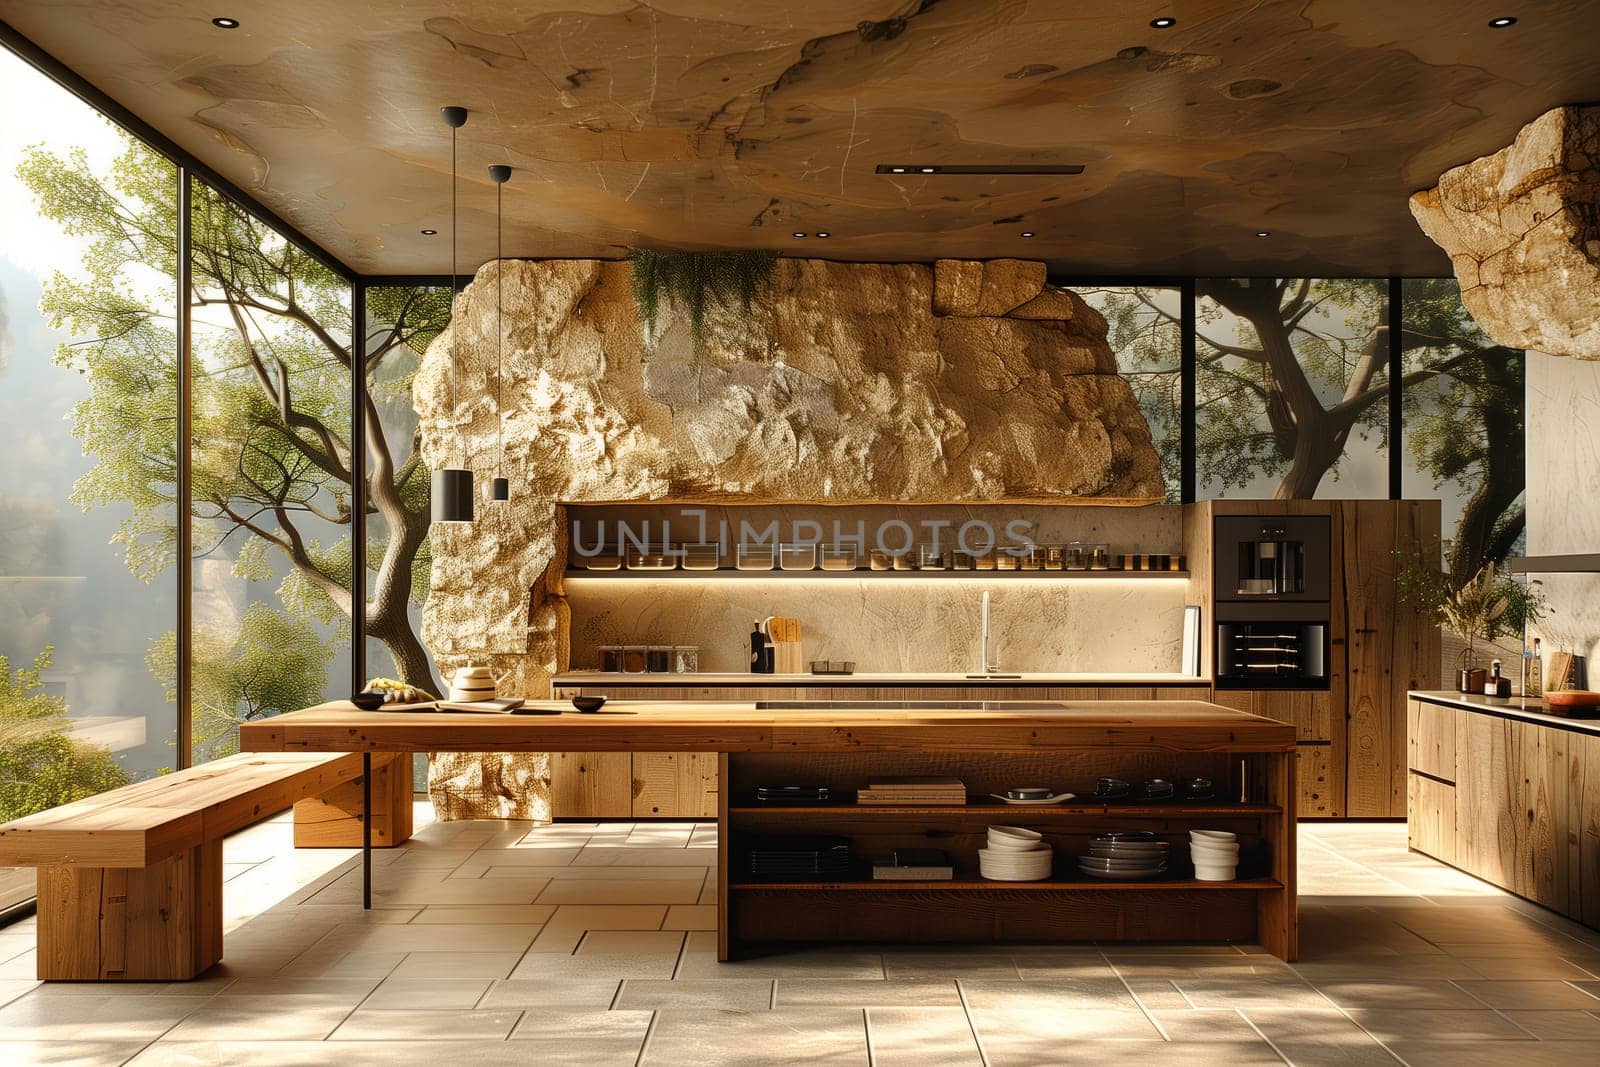 A kitchen featuring a large island made of hardwood planks, a table, and a bench, all showcasing the natural beauty of wood stains. The flooring complements the rustic landscape design